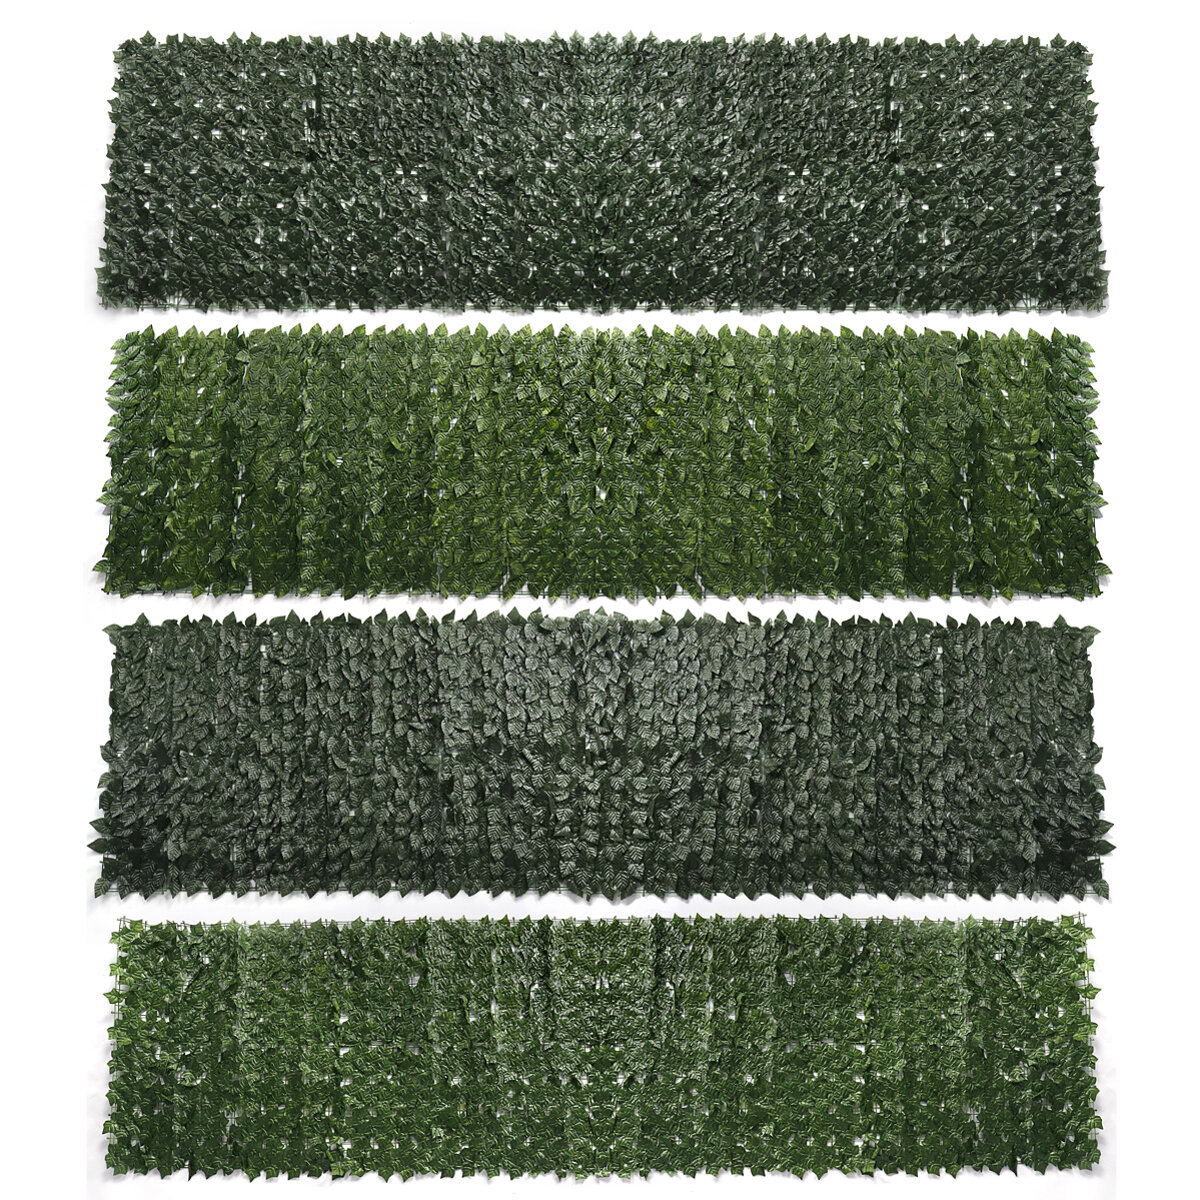 1x4M Artificial Faux Ivy Leaf Privacy Fence Screen Hedge Decor Panels Garden Outdoor COD